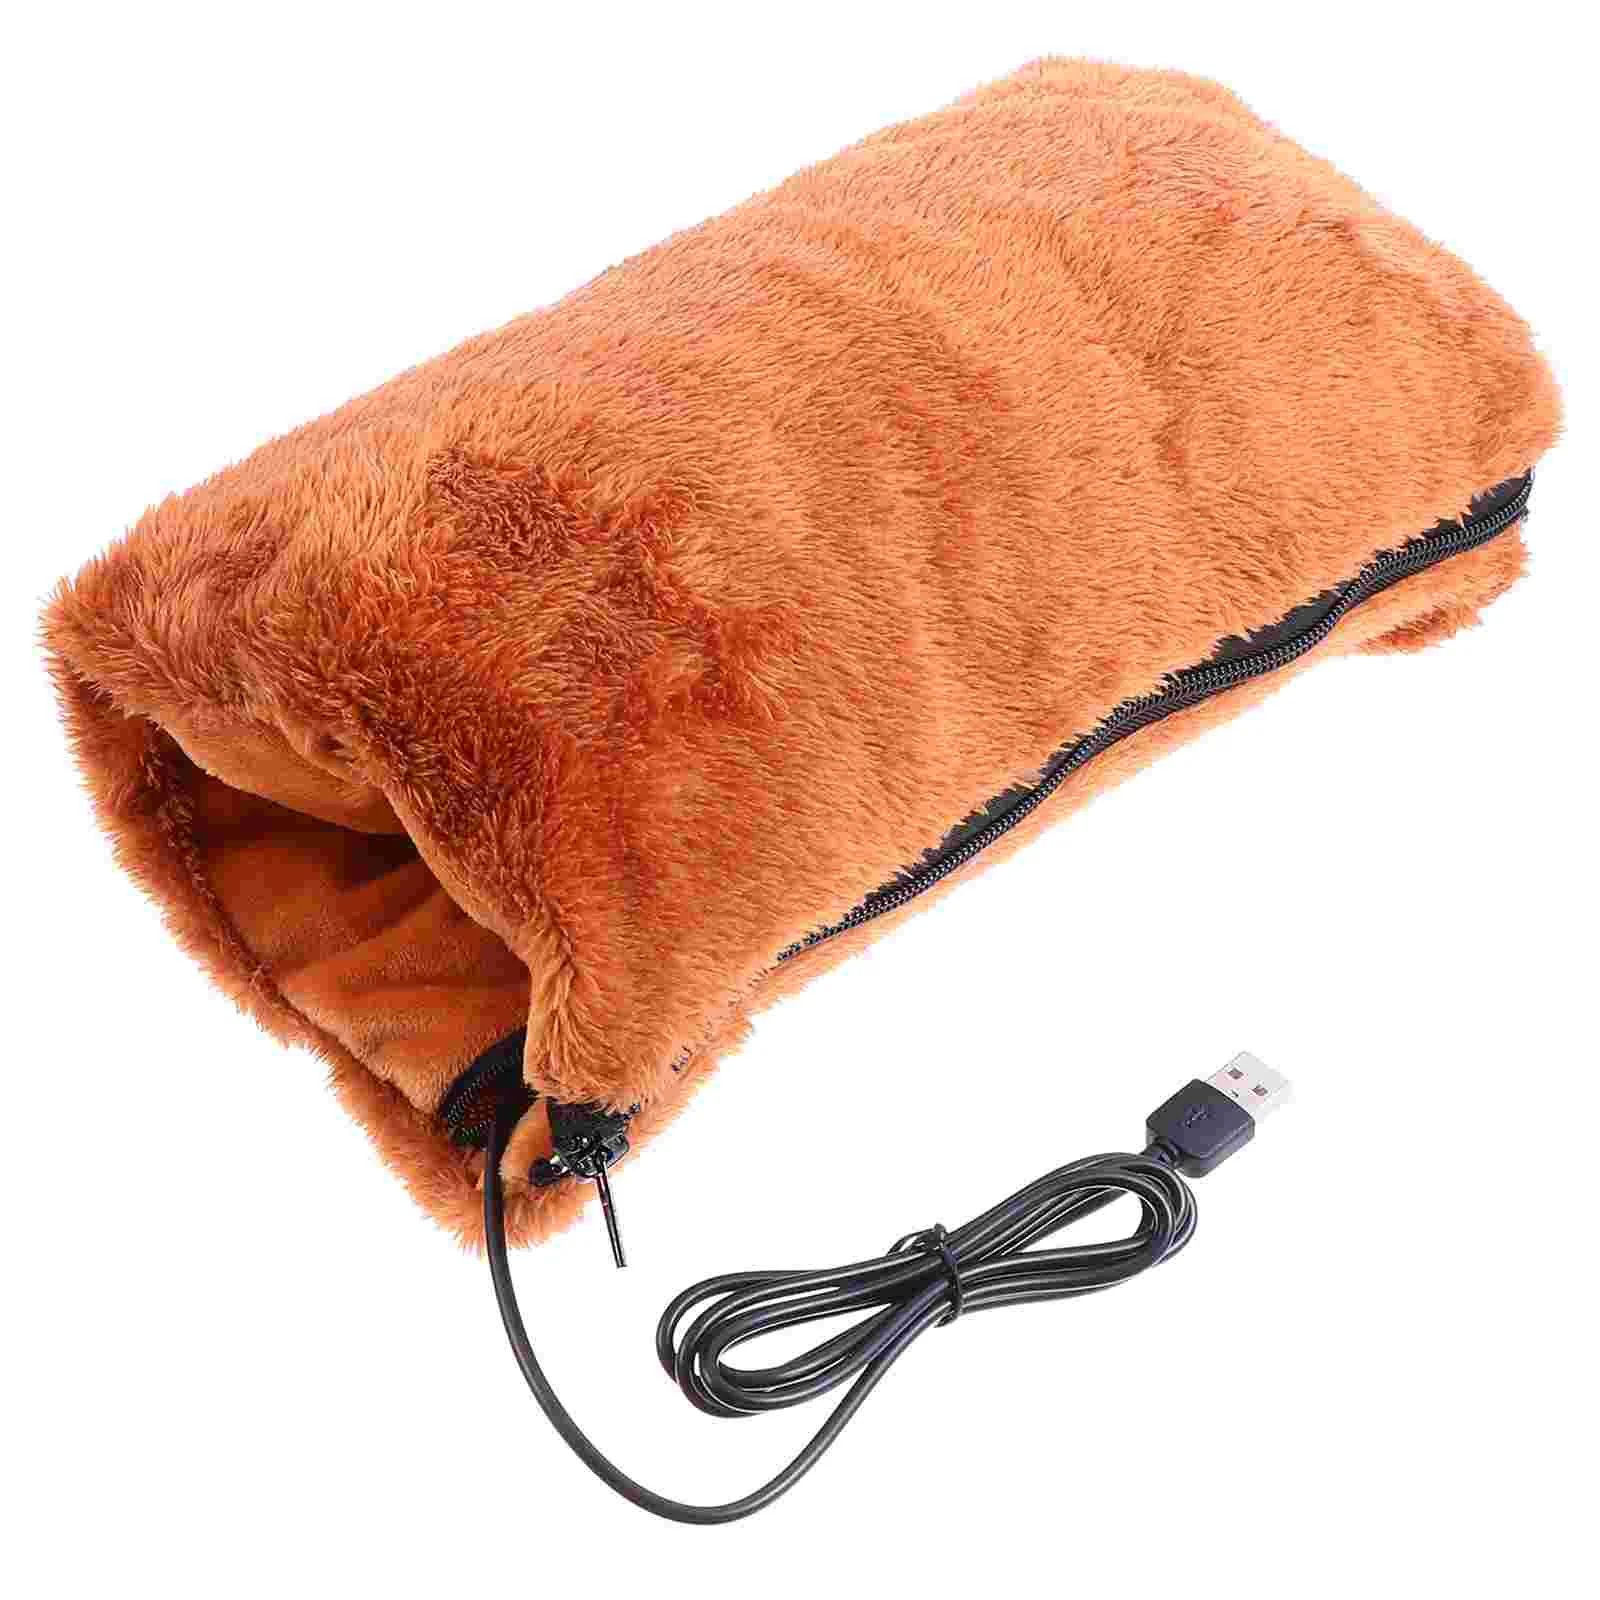 

USB Hand Warmer Warming Treasure Winter Plush Portable Heater Warmers Flannel Heating Electric Rechargeable